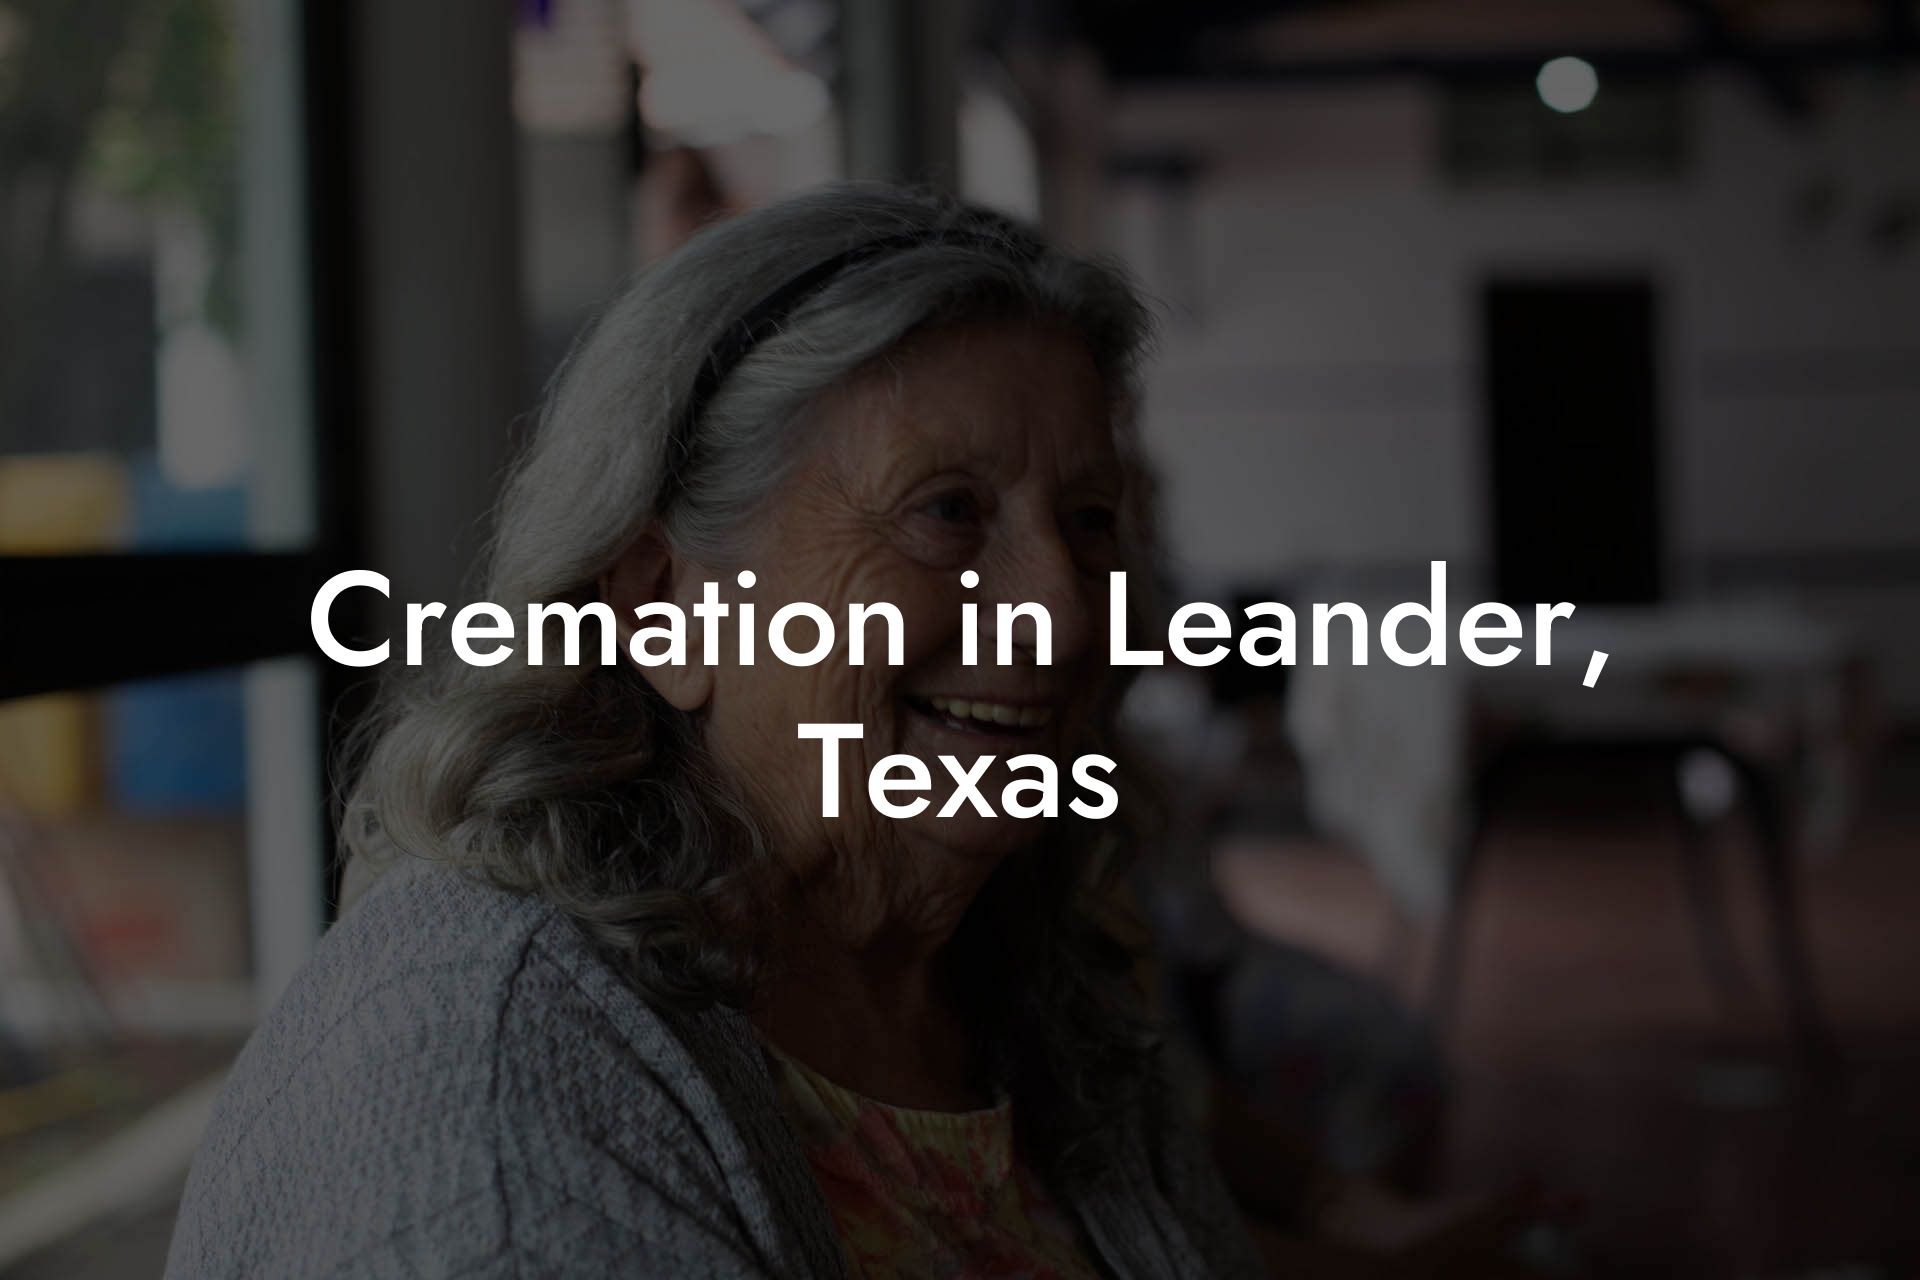 Cremation in Leander, Texas